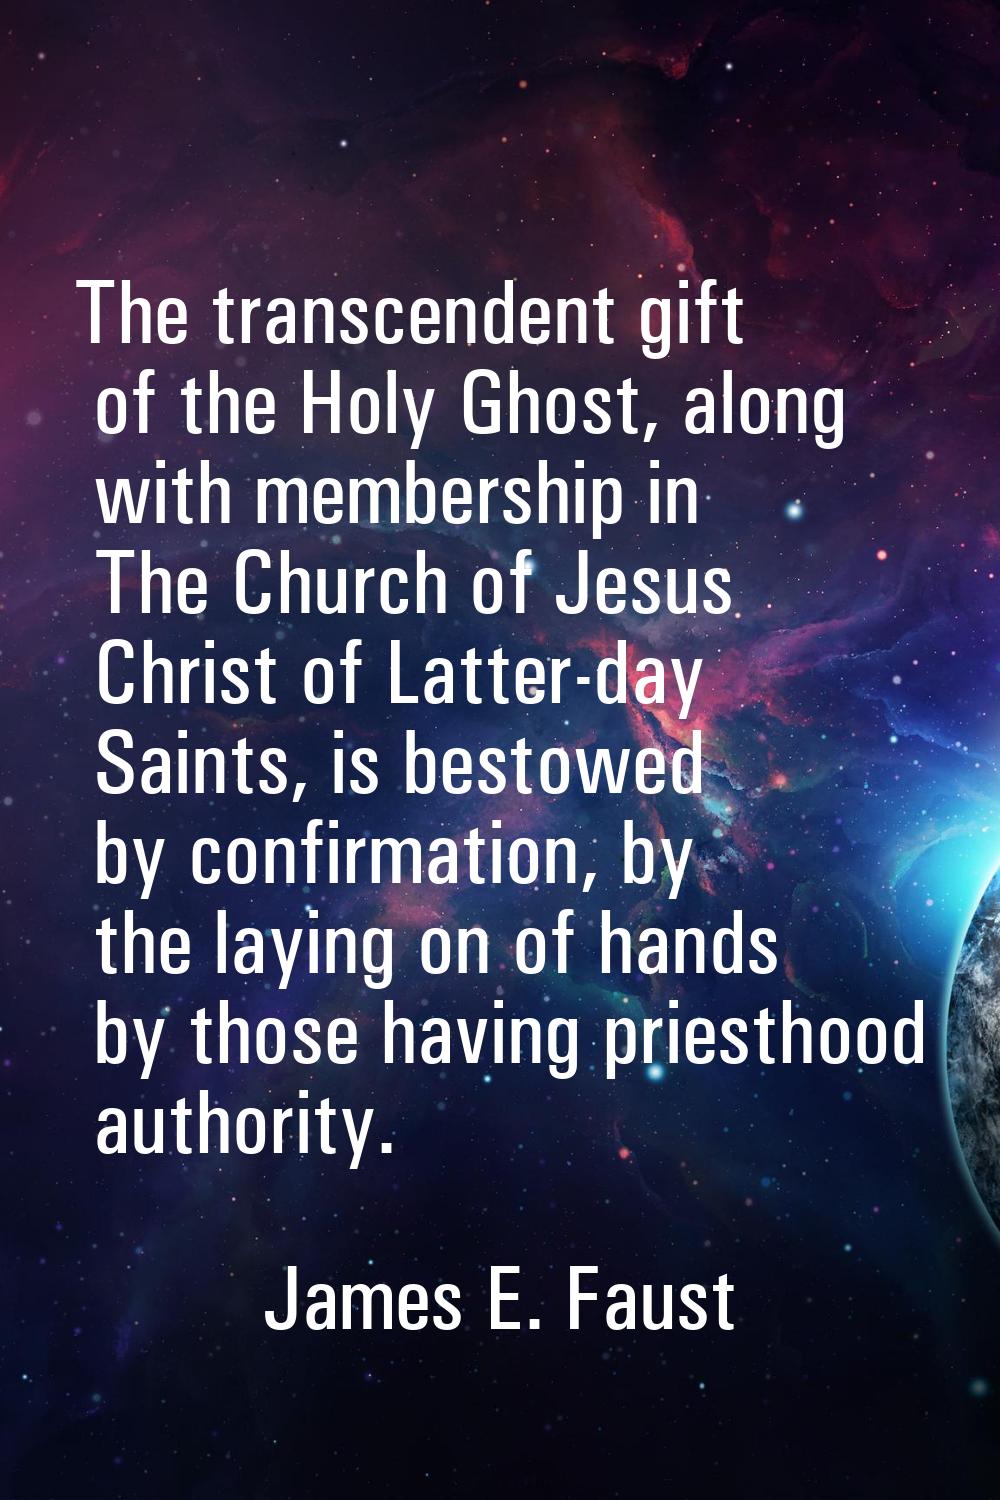 The transcendent gift of the Holy Ghost, along with membership in The Church of Jesus Christ of Lat